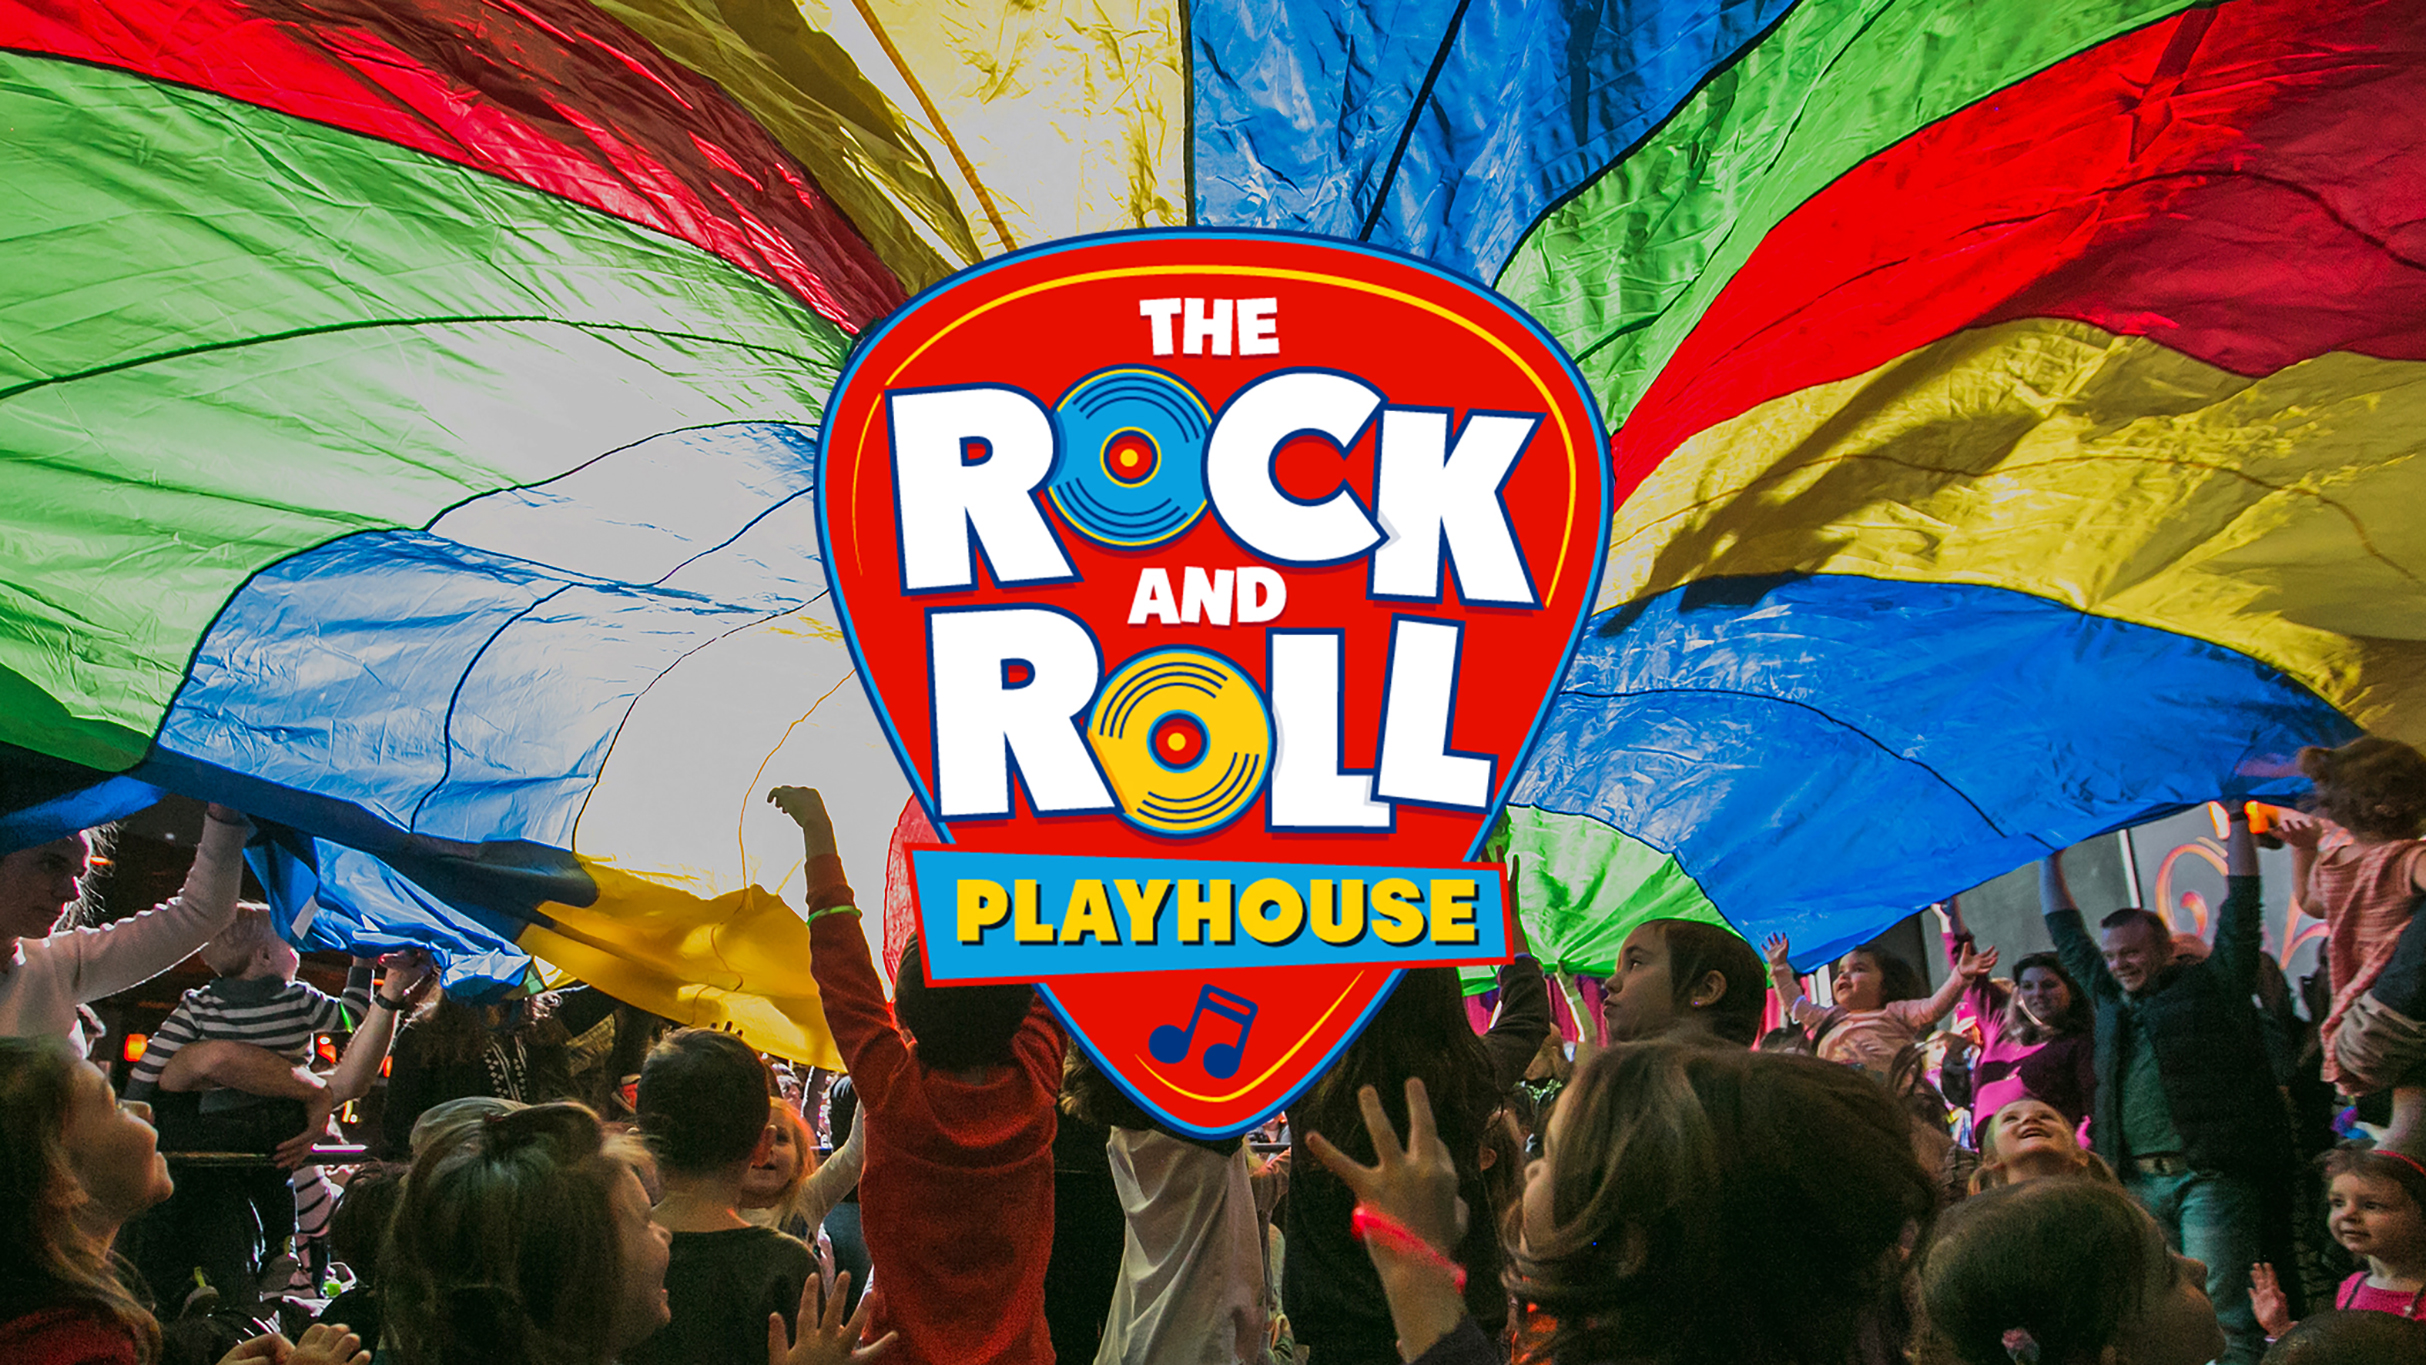 The Rock & Roll Playhouse Plays Music Of Grateful Dead For Kids + More